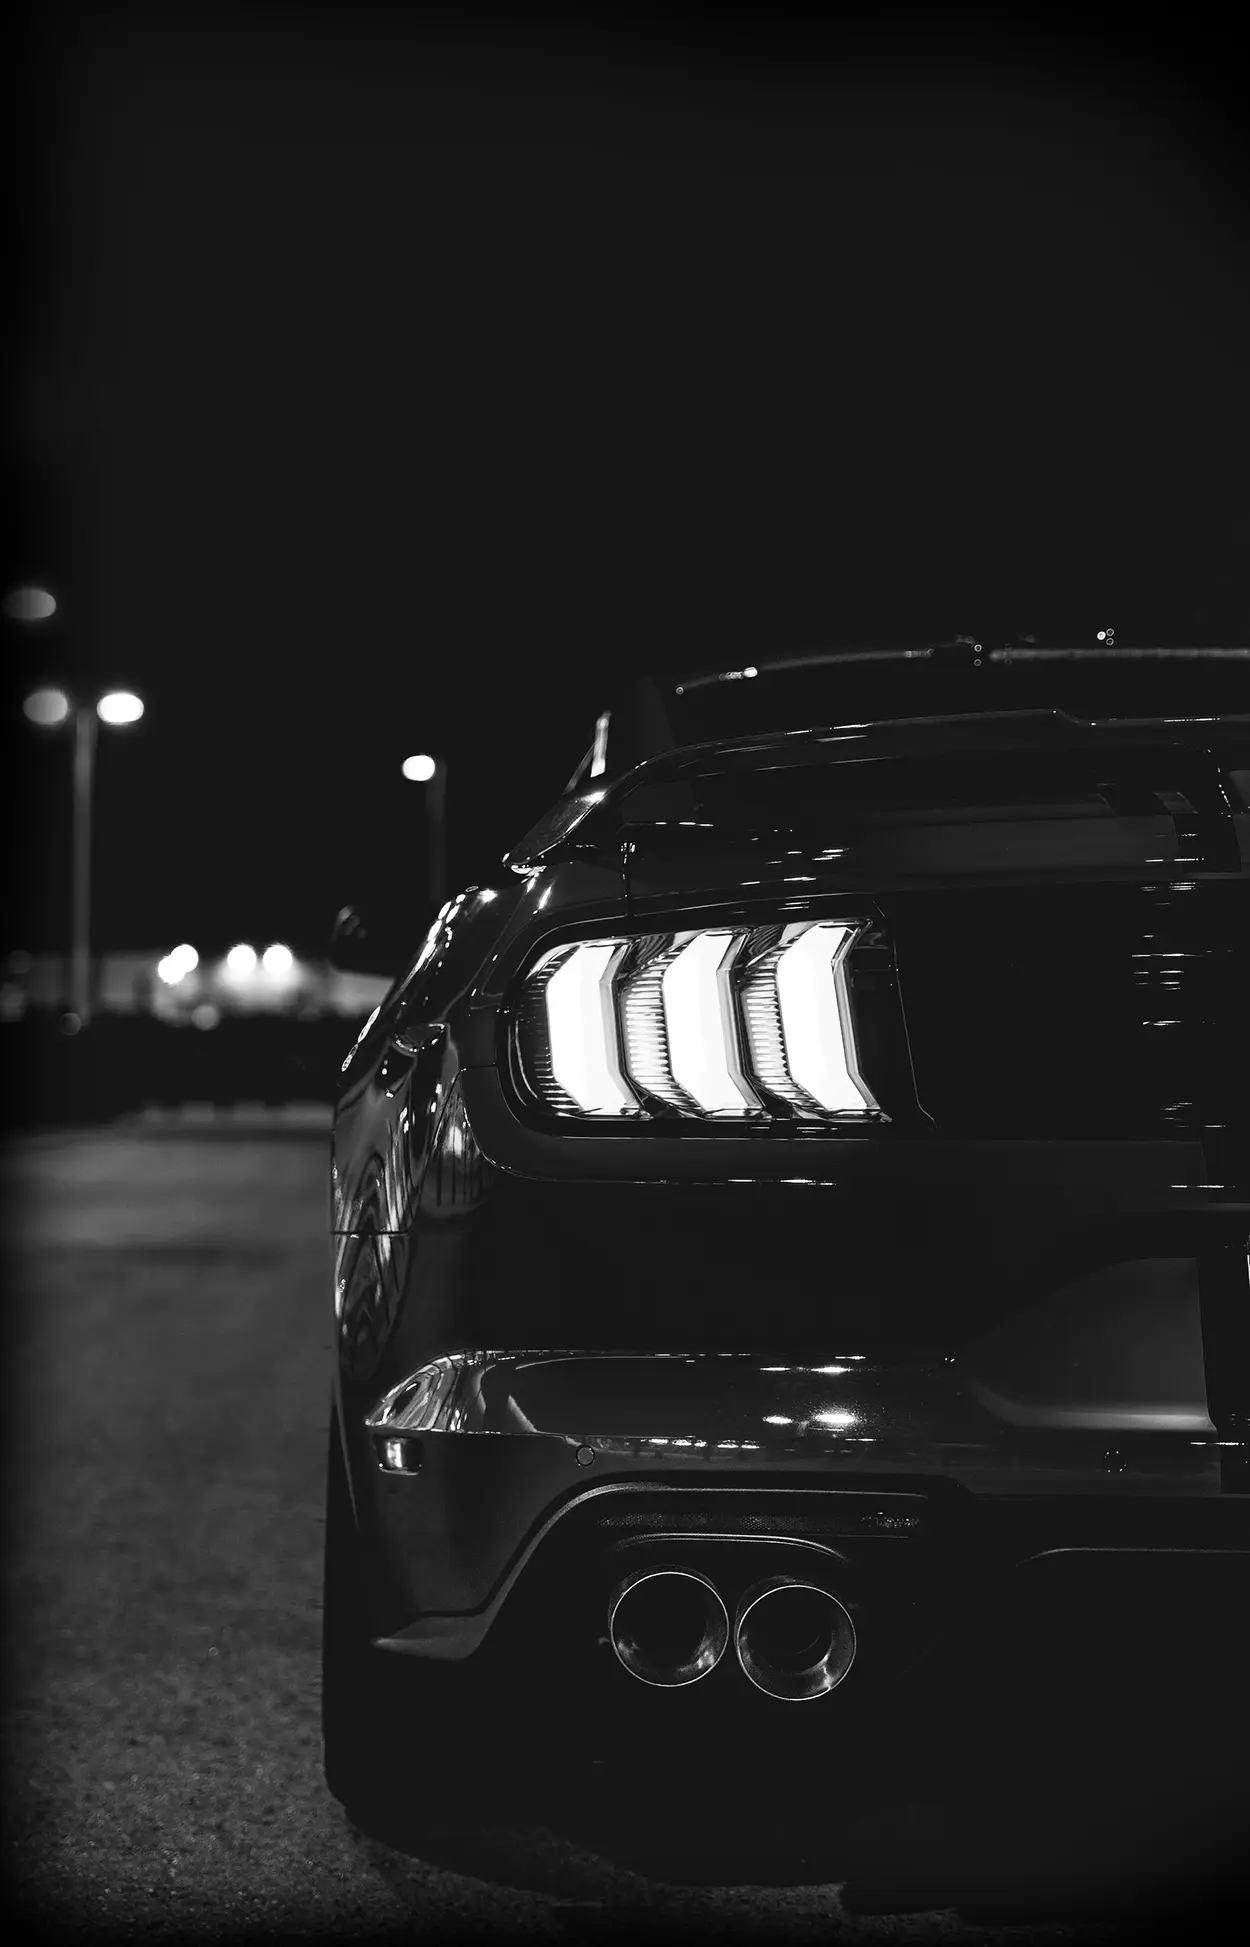  black and white Ford Mustang tail light from the rear